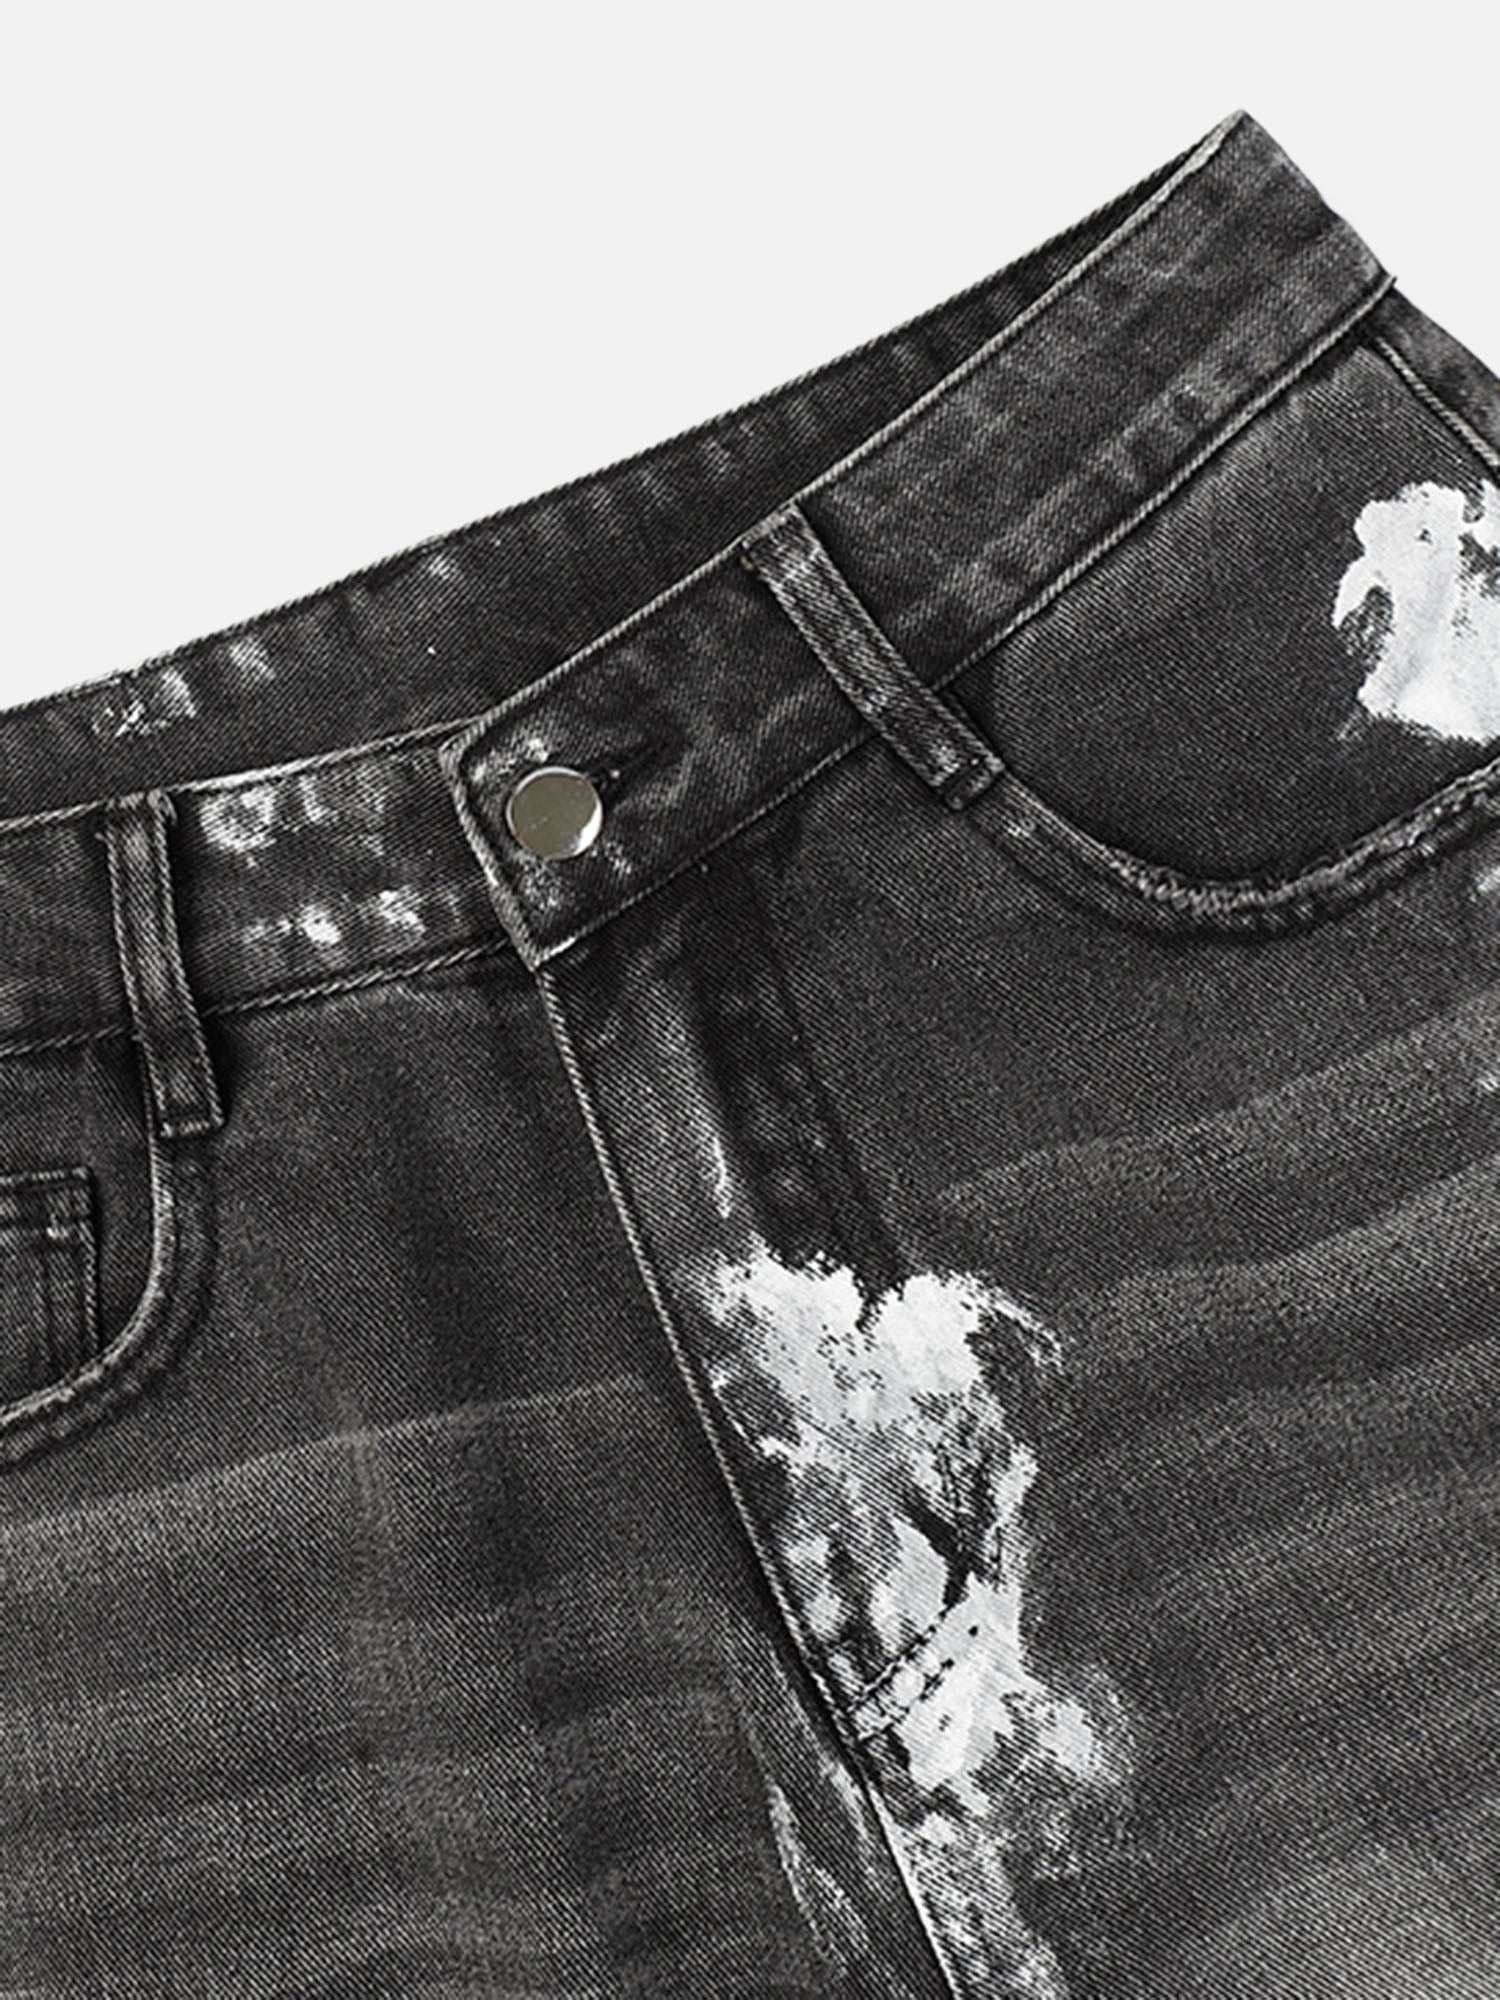 American Street Fashion Heavy Industry Washed Distressed Jeans